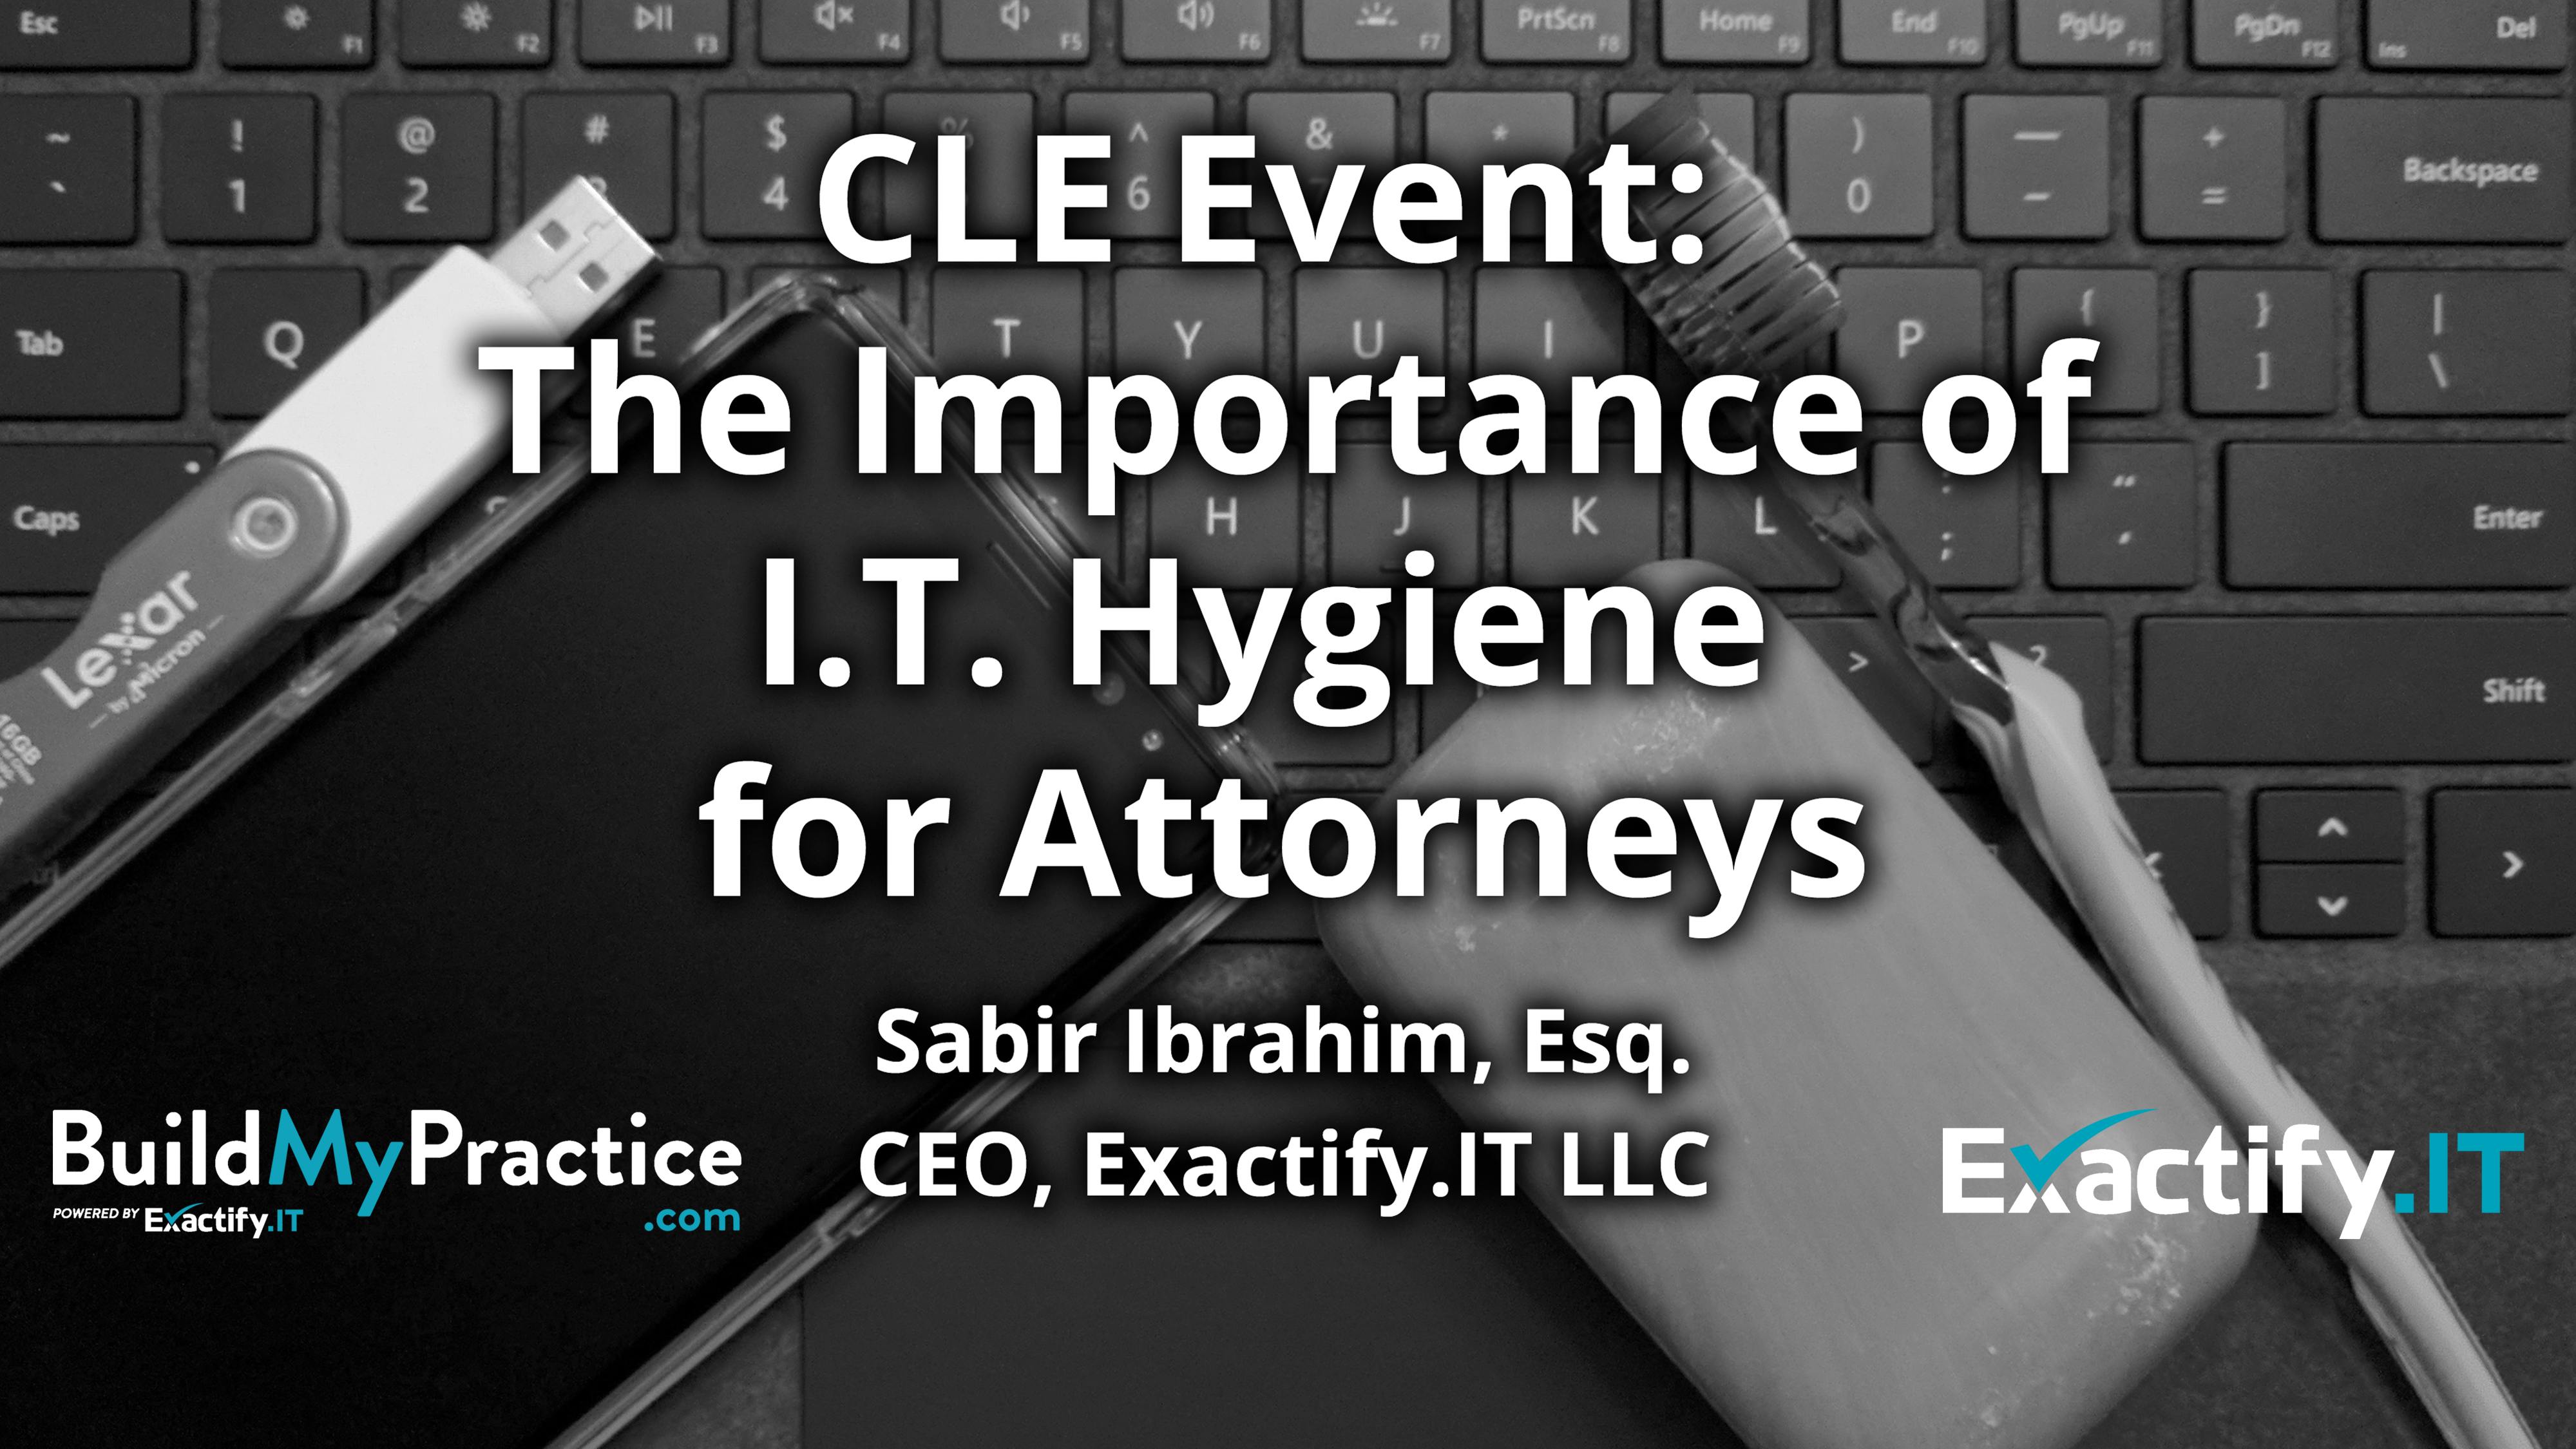 CLE Event: The Importance of I.T. Hygiene for Attorneys